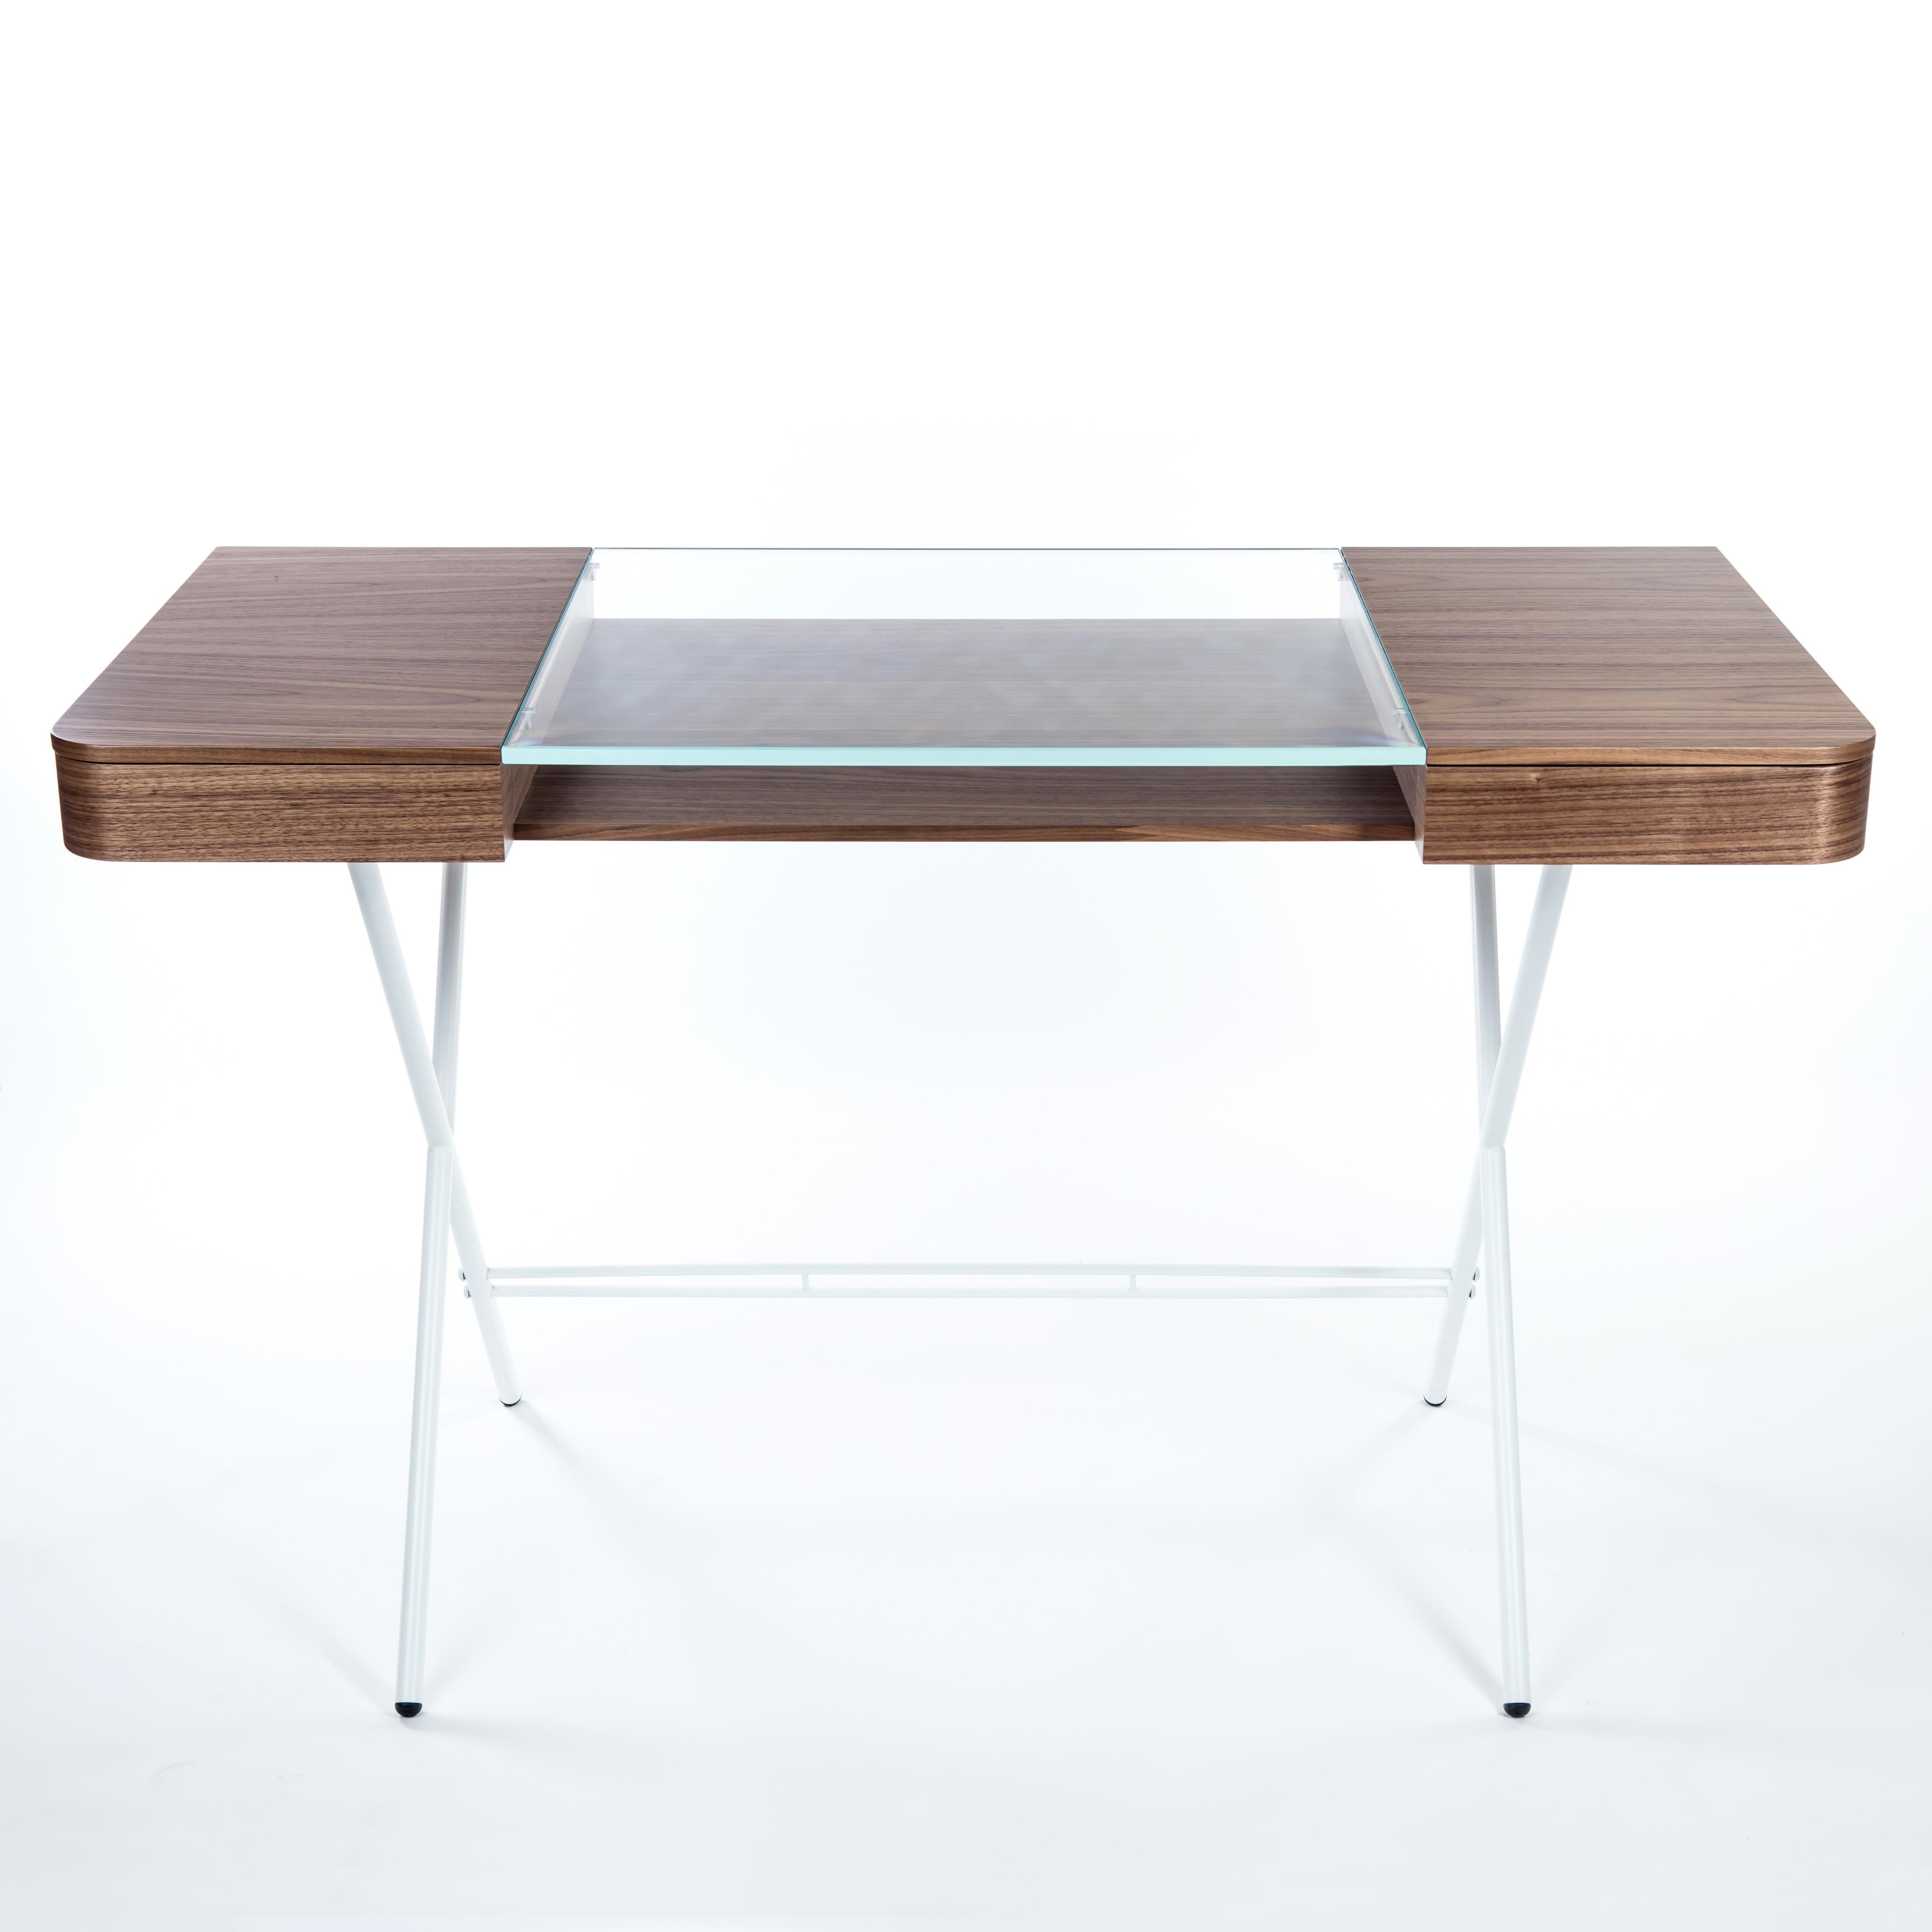 The Cosimo desk was designed by the architect Marco Zanuso Jr for luxury French furniture brand, Adentro Paris.
The desk is composed of a central extra clear glass panel with a storage below and has drawers on either side that provide ample storage